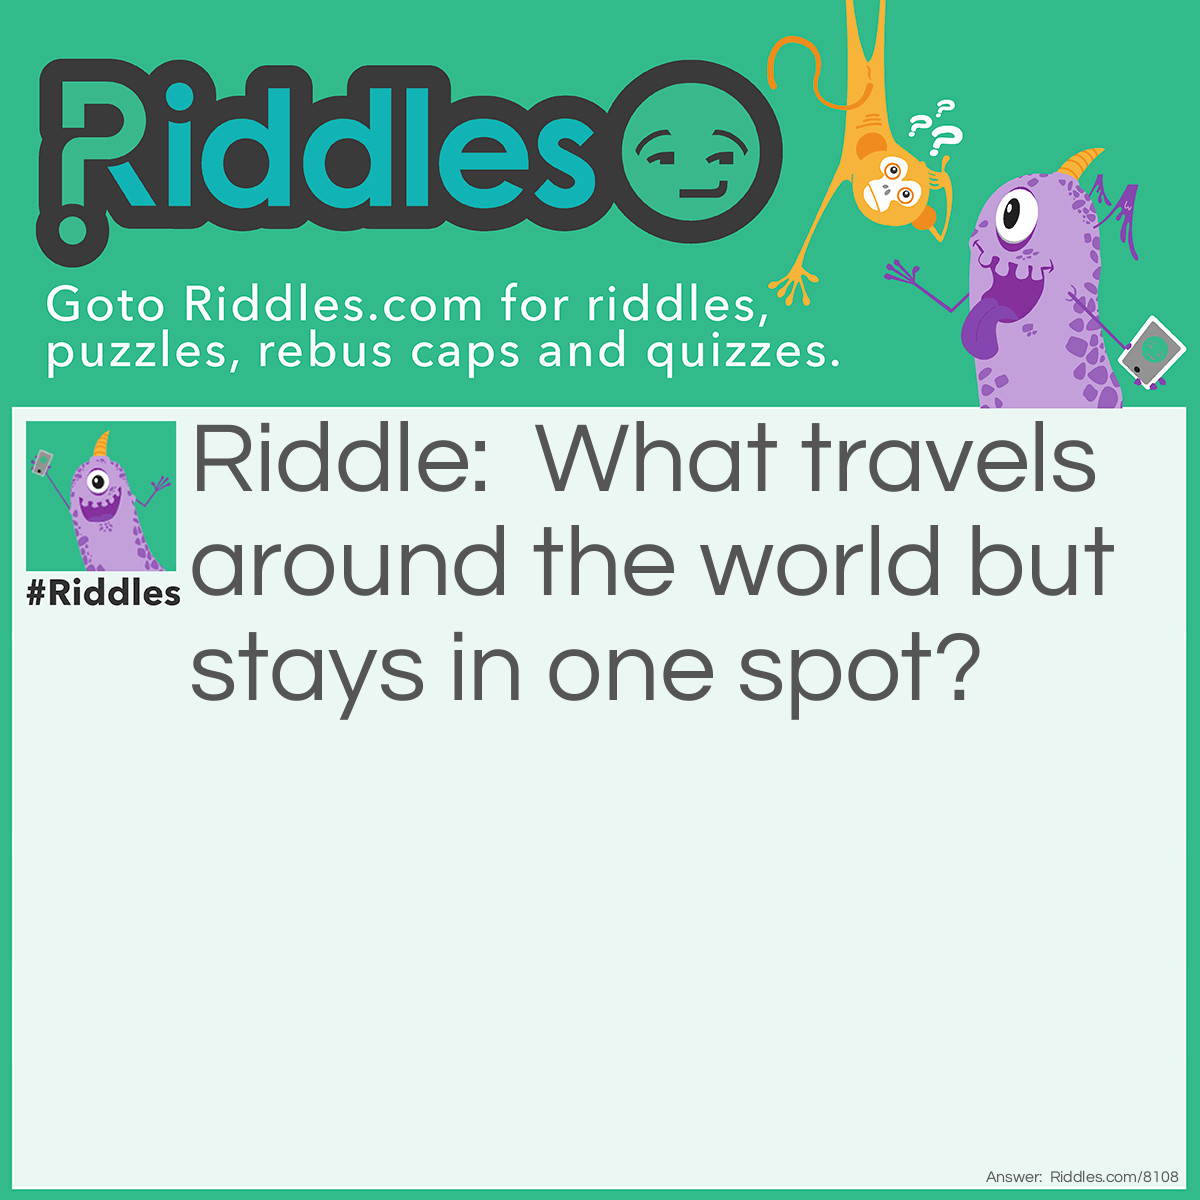 Riddle: What travels around the world but stays in one spot? Answer: A Postage Stamp